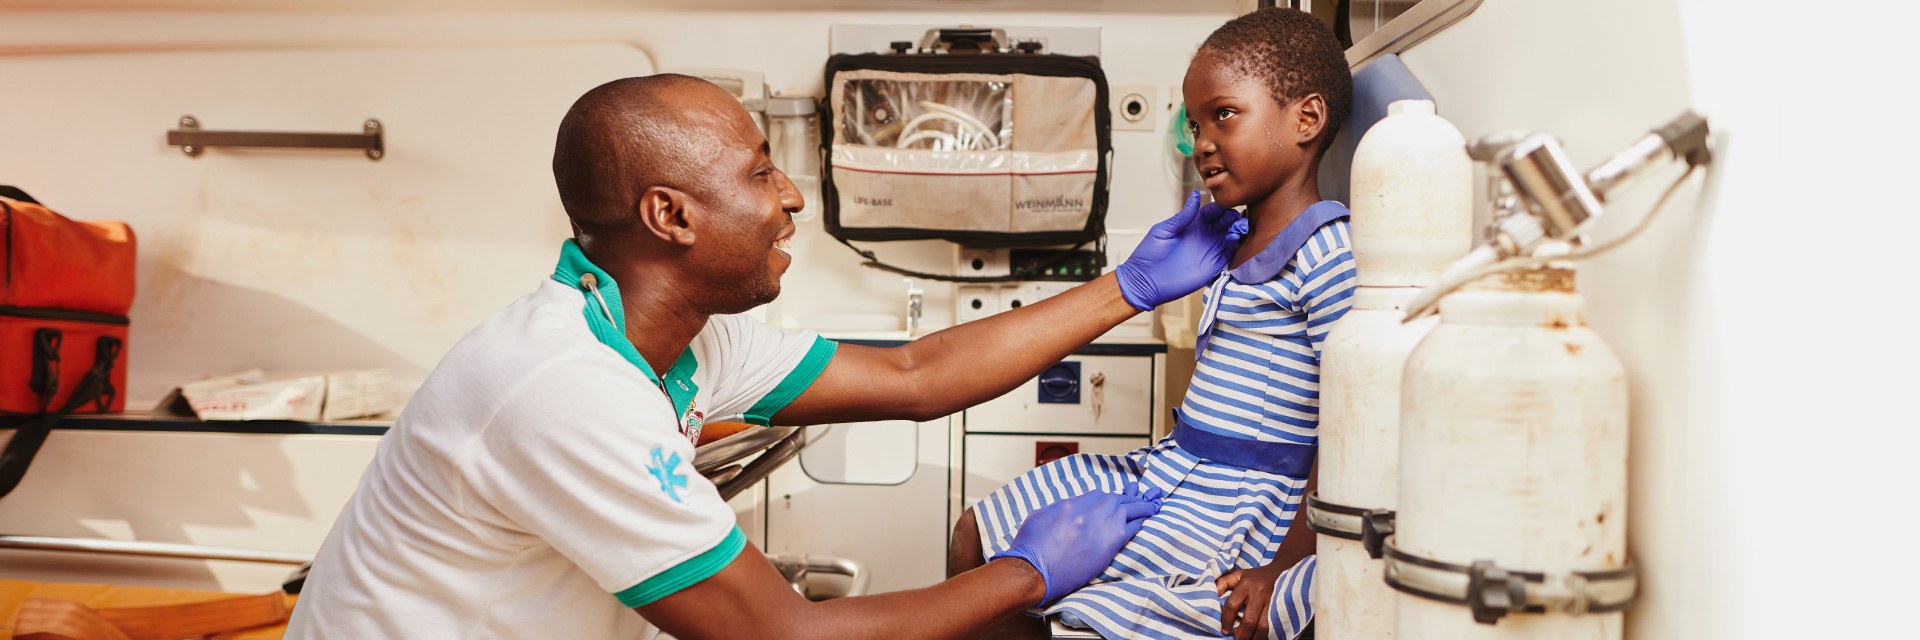 A health worker and young girl in a health clinic.